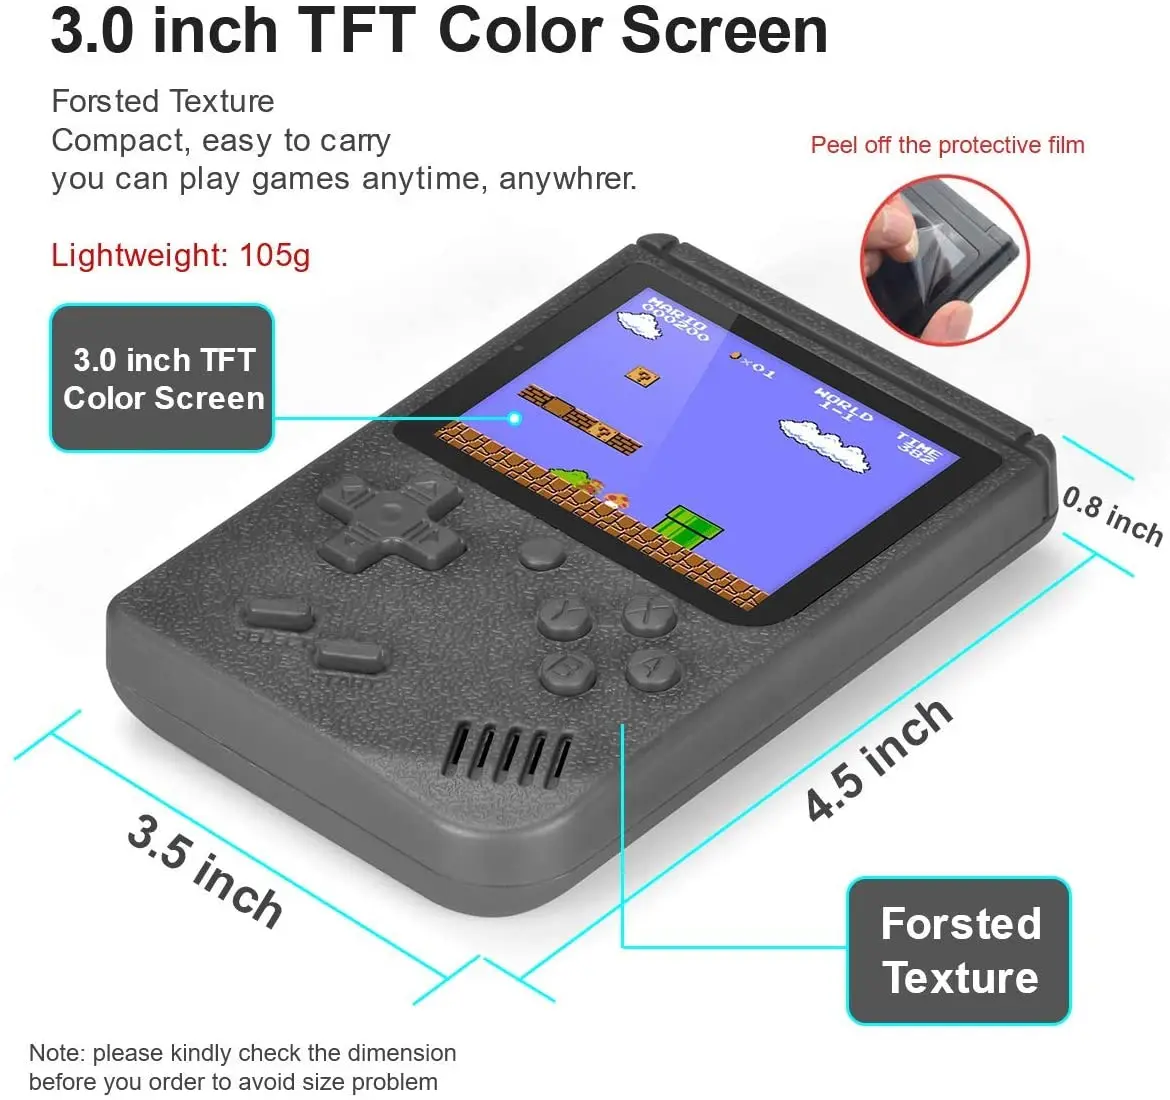 New retro 3 inch color LCD screen handheld portable game console with built-in 400 in 1 mini leisure game box children gifts Sup